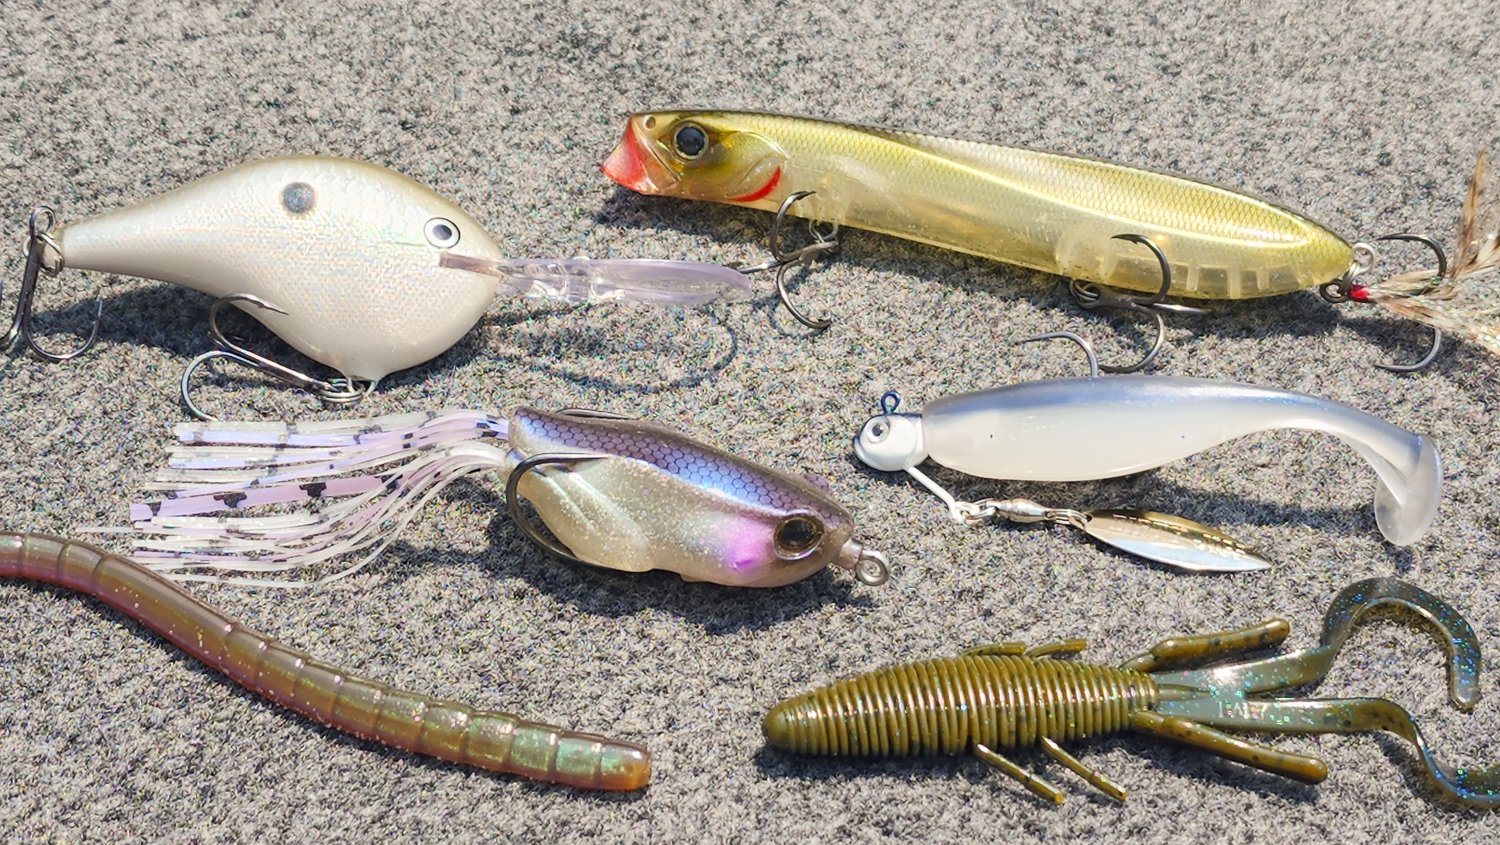 Popular Colors: Making Black & Blue Laminate Baits: Did These